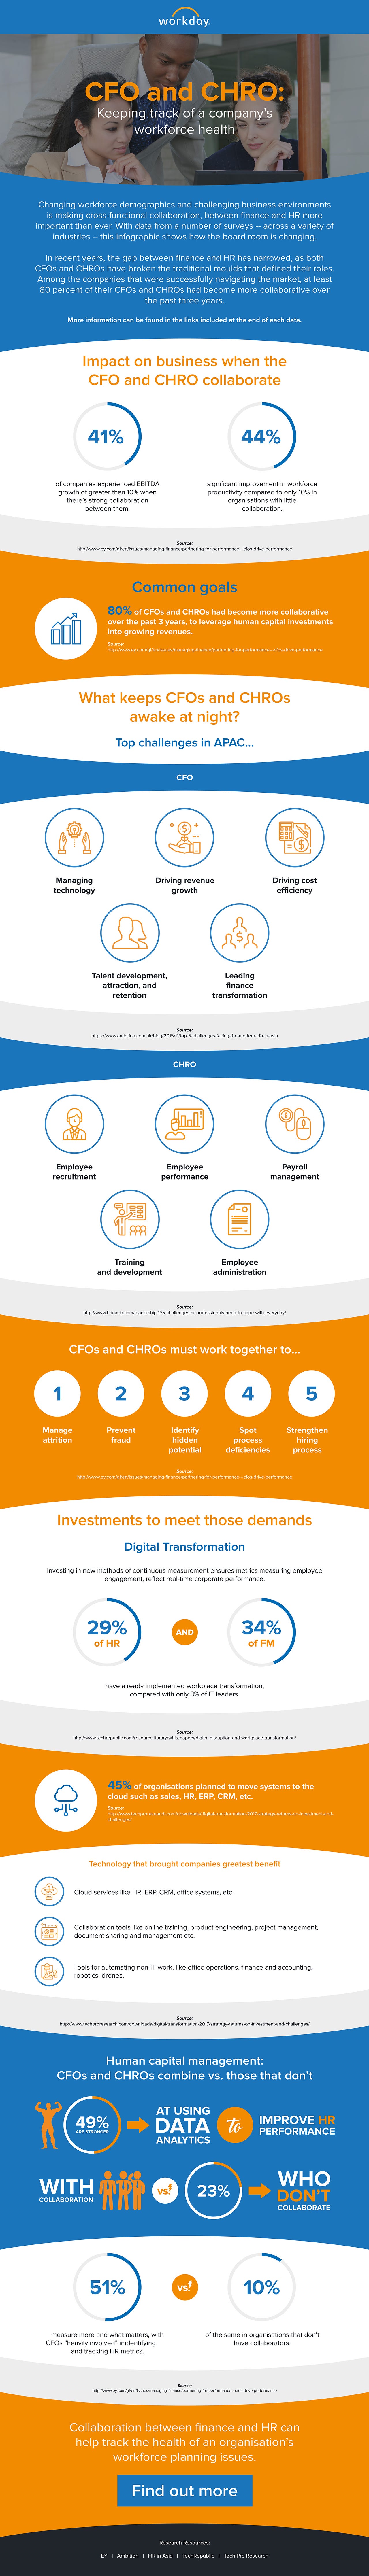 workday-infographiccfochro-2.jpg